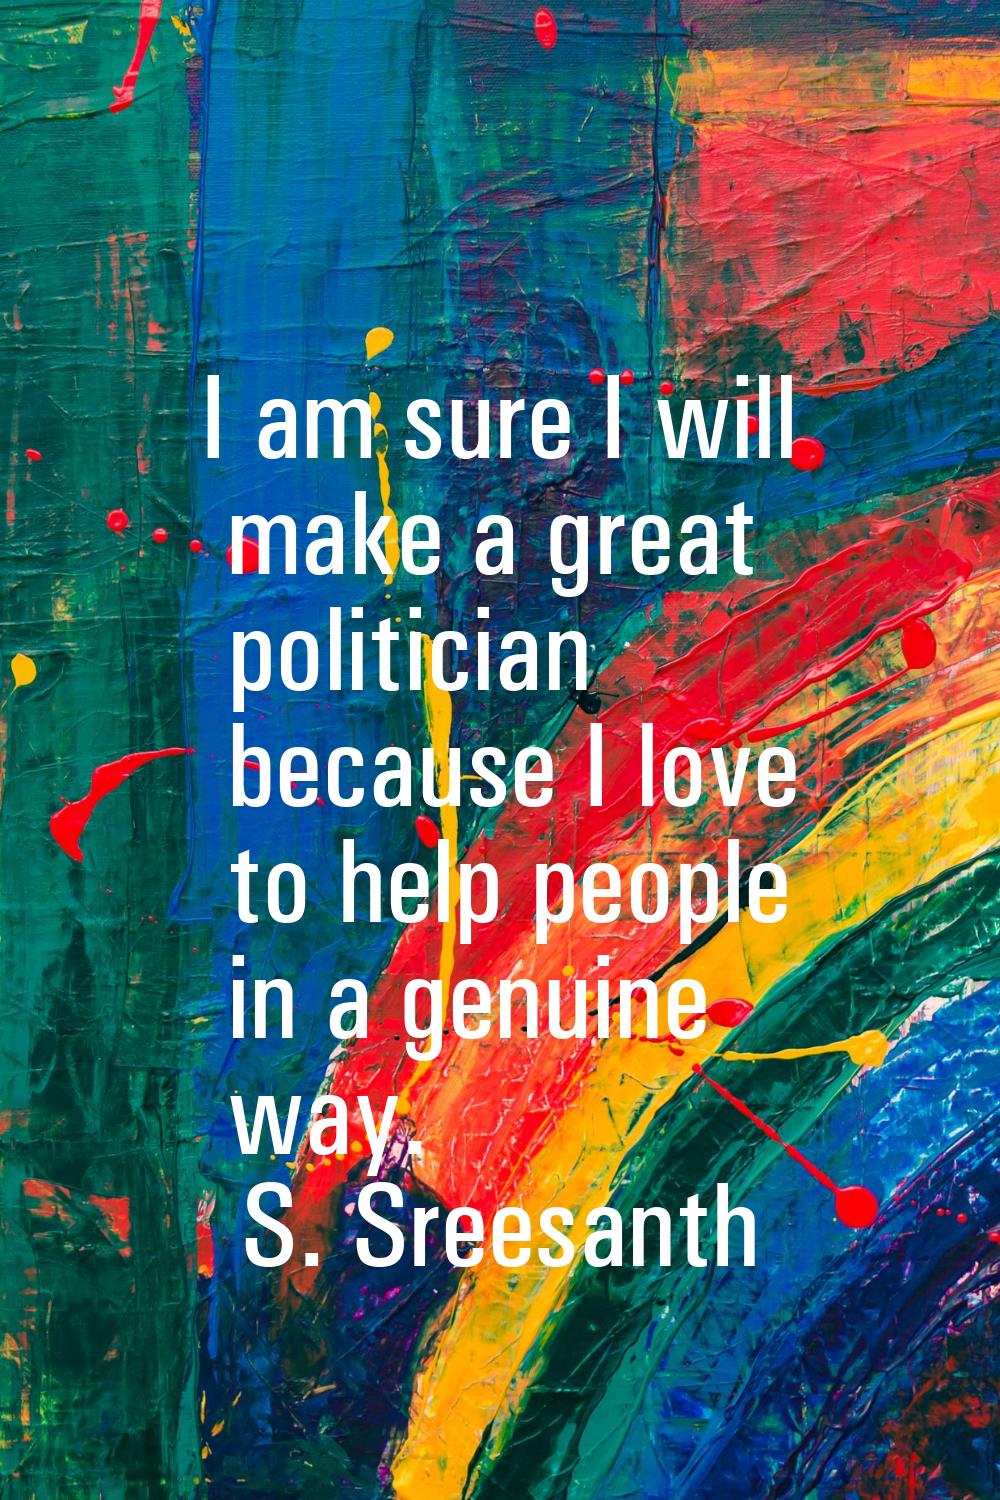 I am sure I will make a great politician because I love to help people in a genuine way.